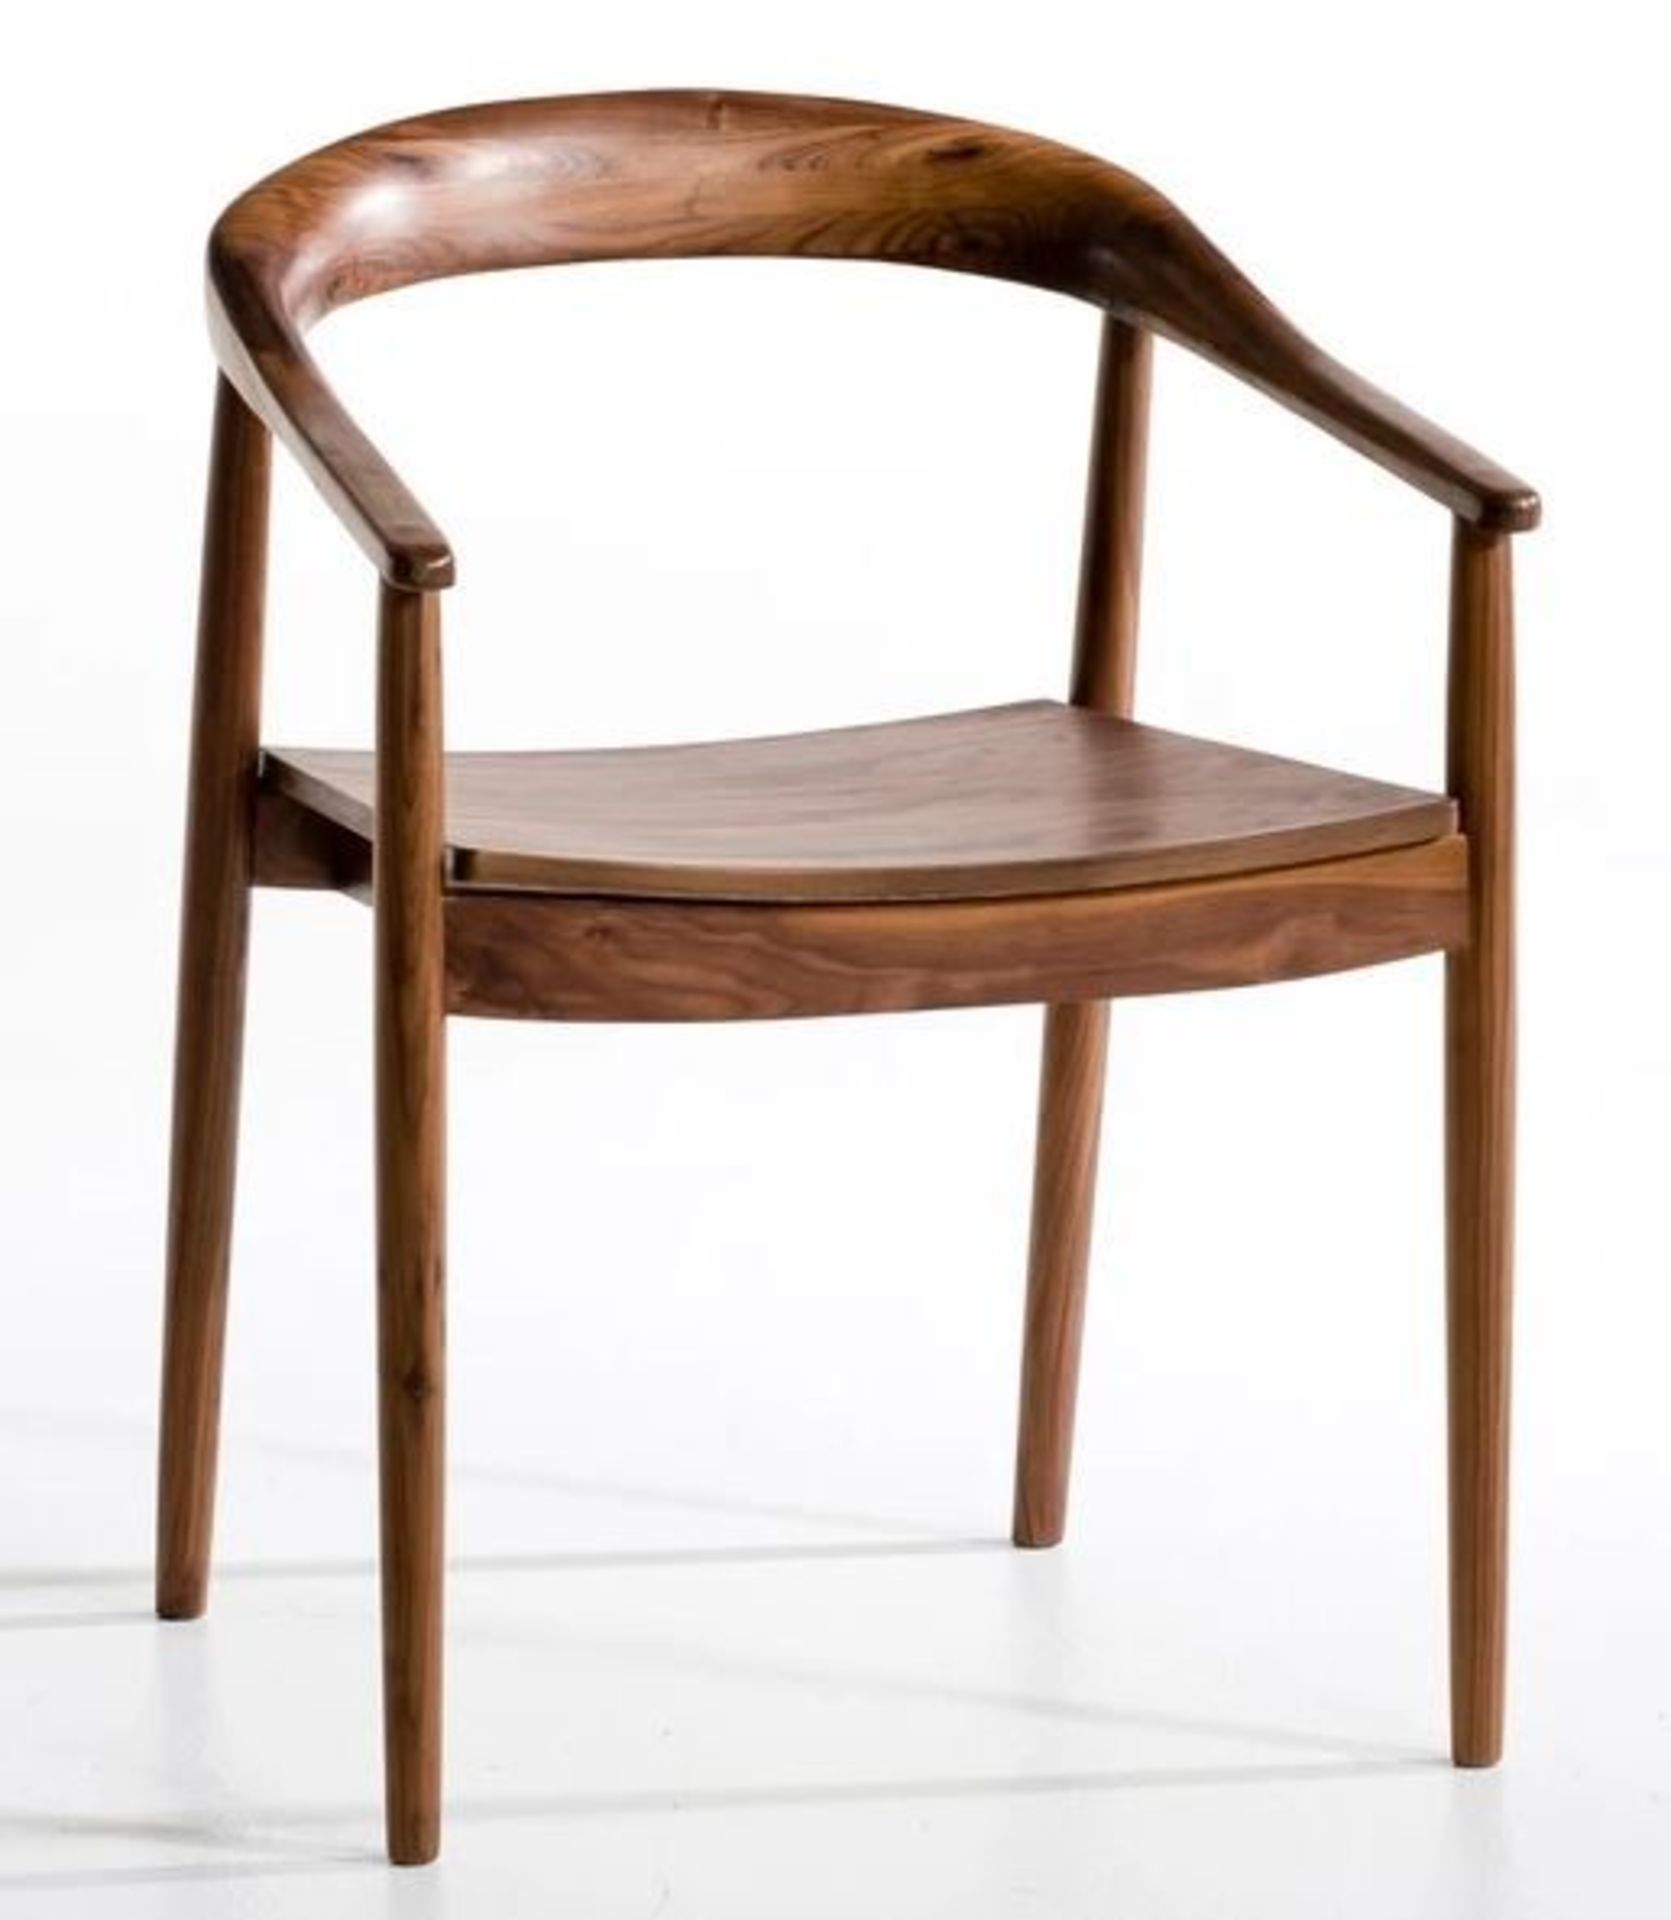 1 GRADE A BOXED DESIGNER GALB WOODEN ARMCHAIR IN WALNUT WOOD / RRP £290.00 (PUBLIC VIEWING